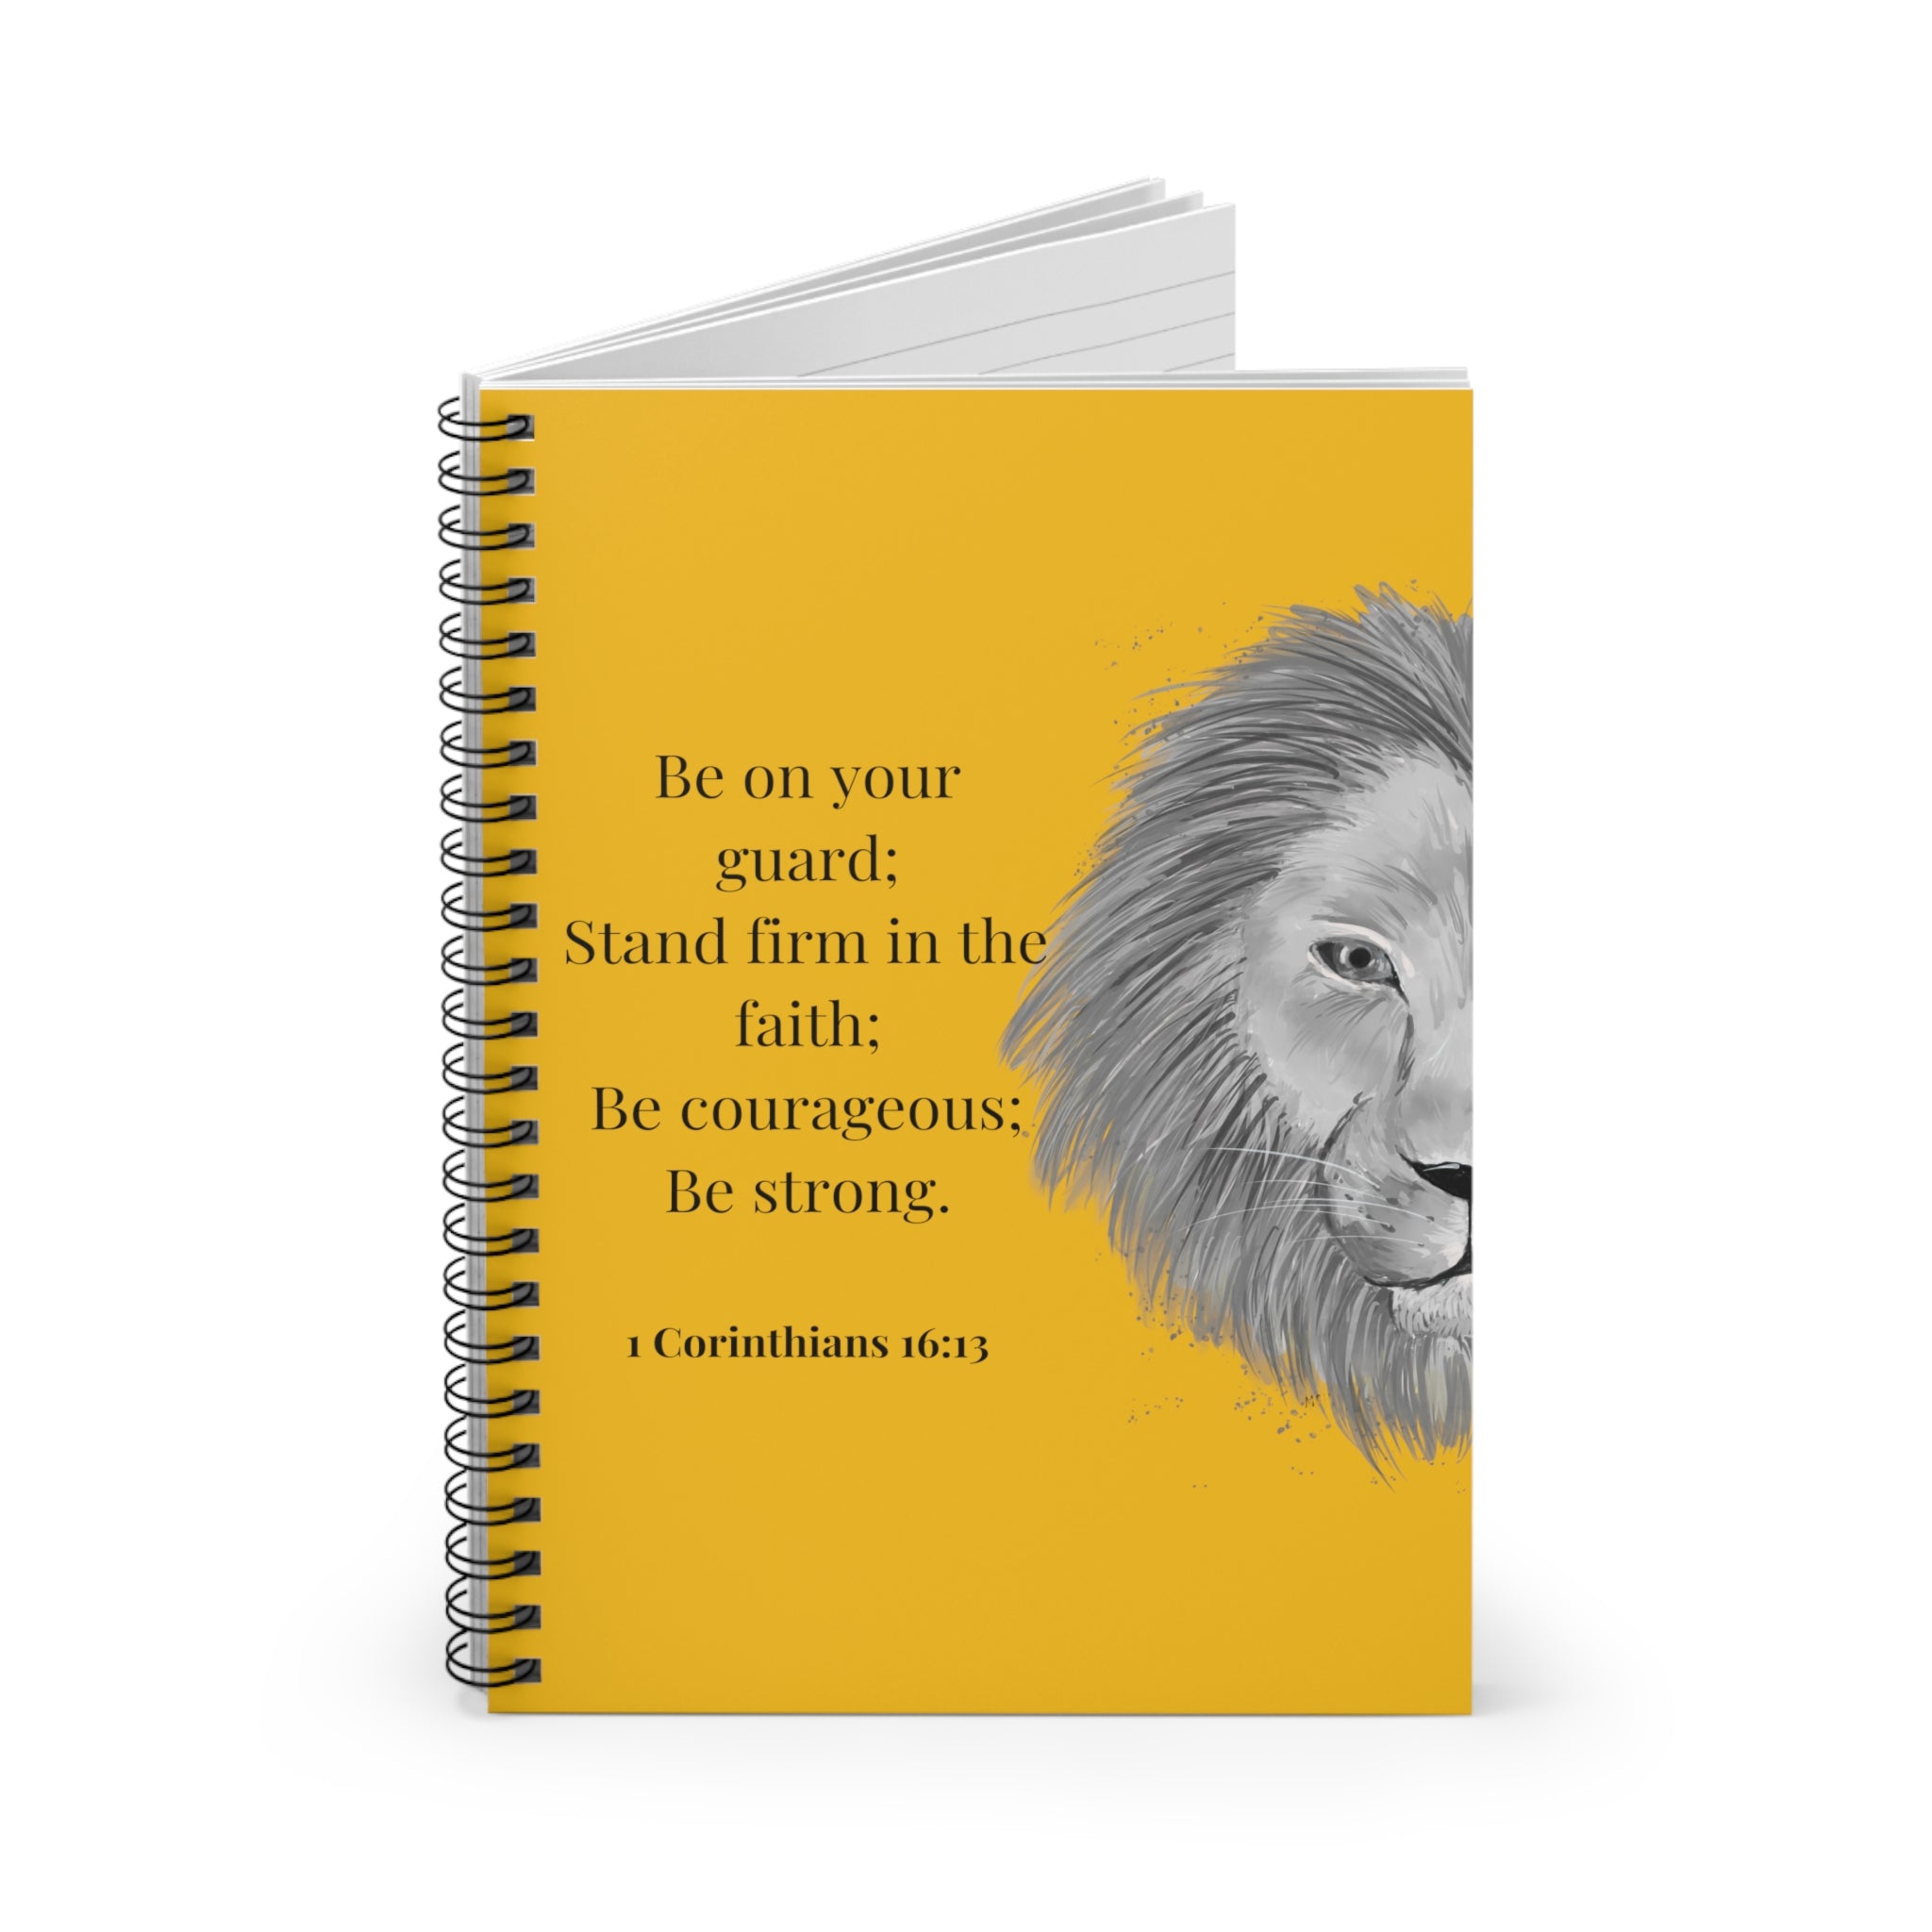 "Courage" Spiral Notebook - Ruled Line